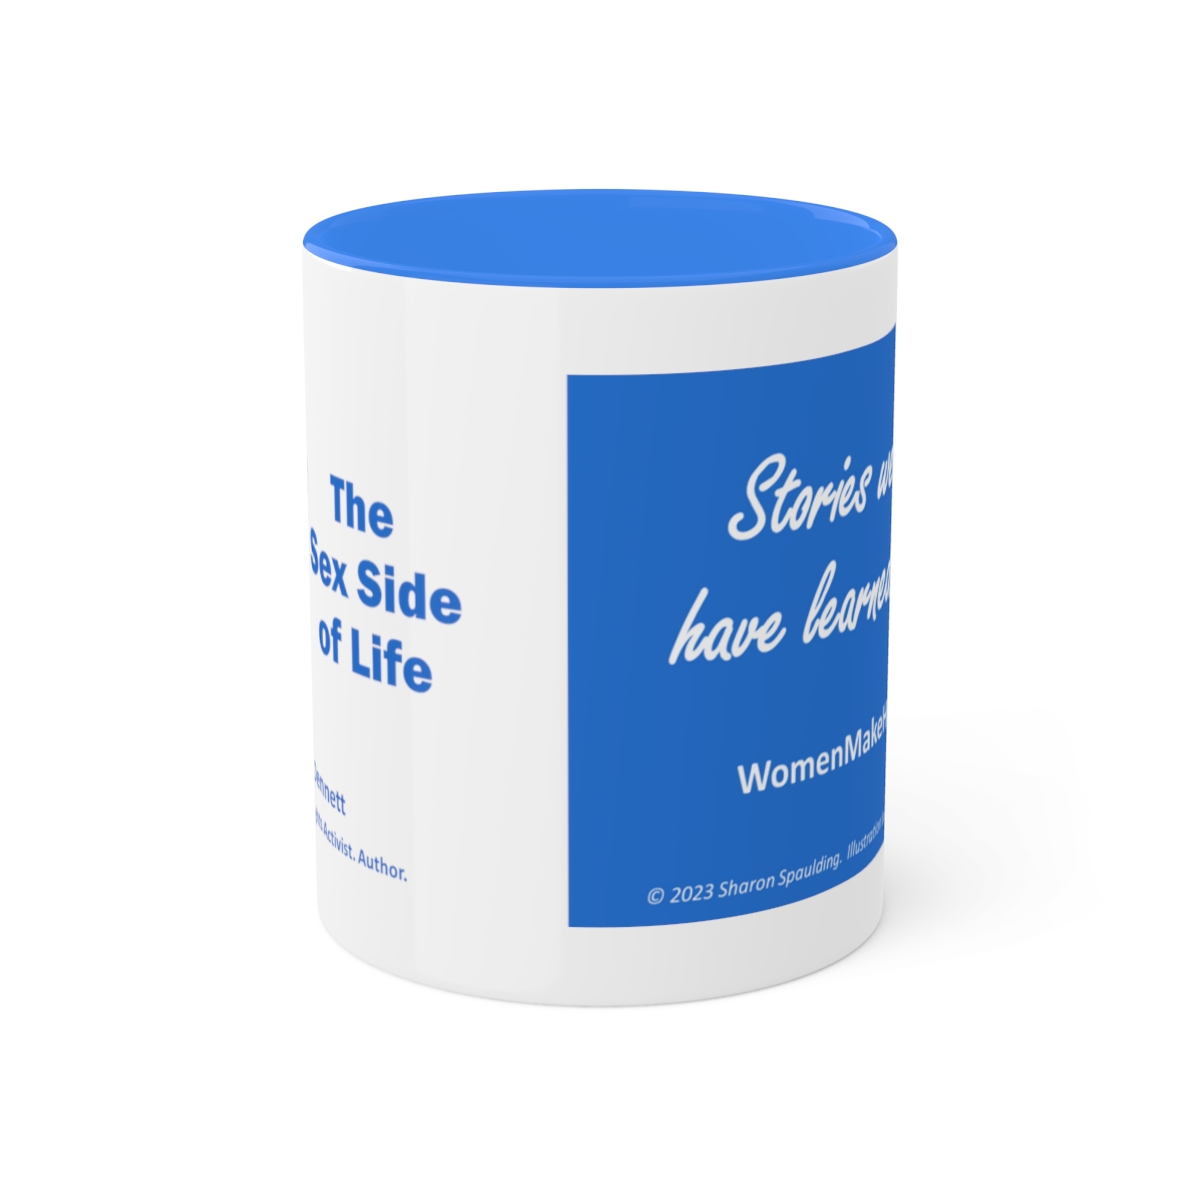 Mary Ware Dennett Mug "The Sex Side of Life" product thumbnail image